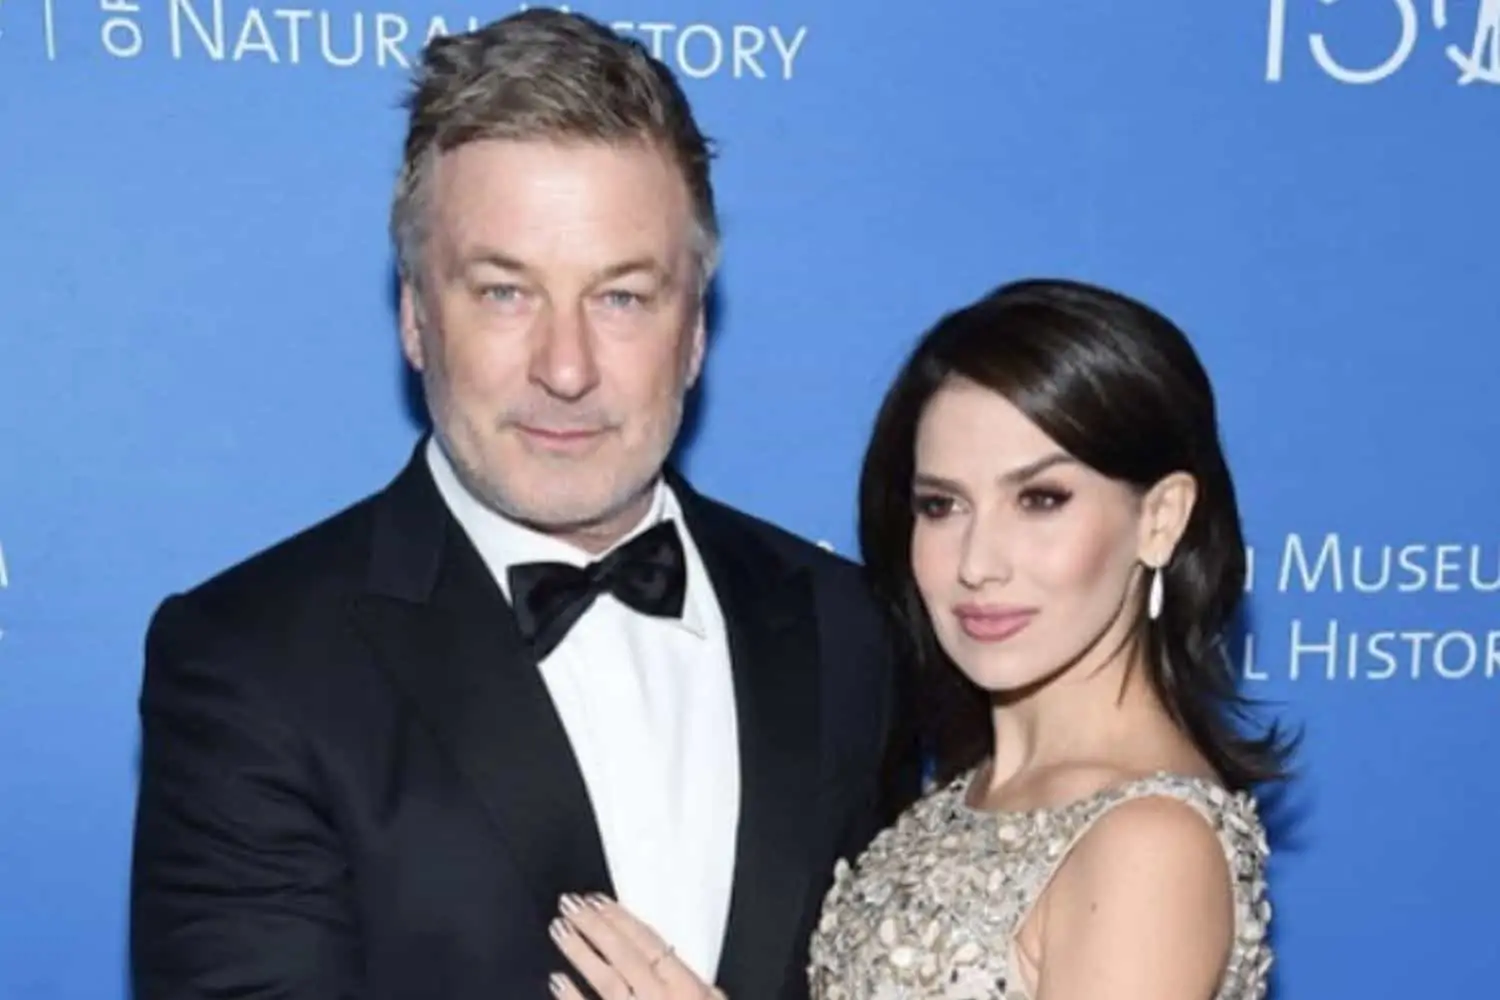 Alec Baldwin sued over fatal shooting accident on set